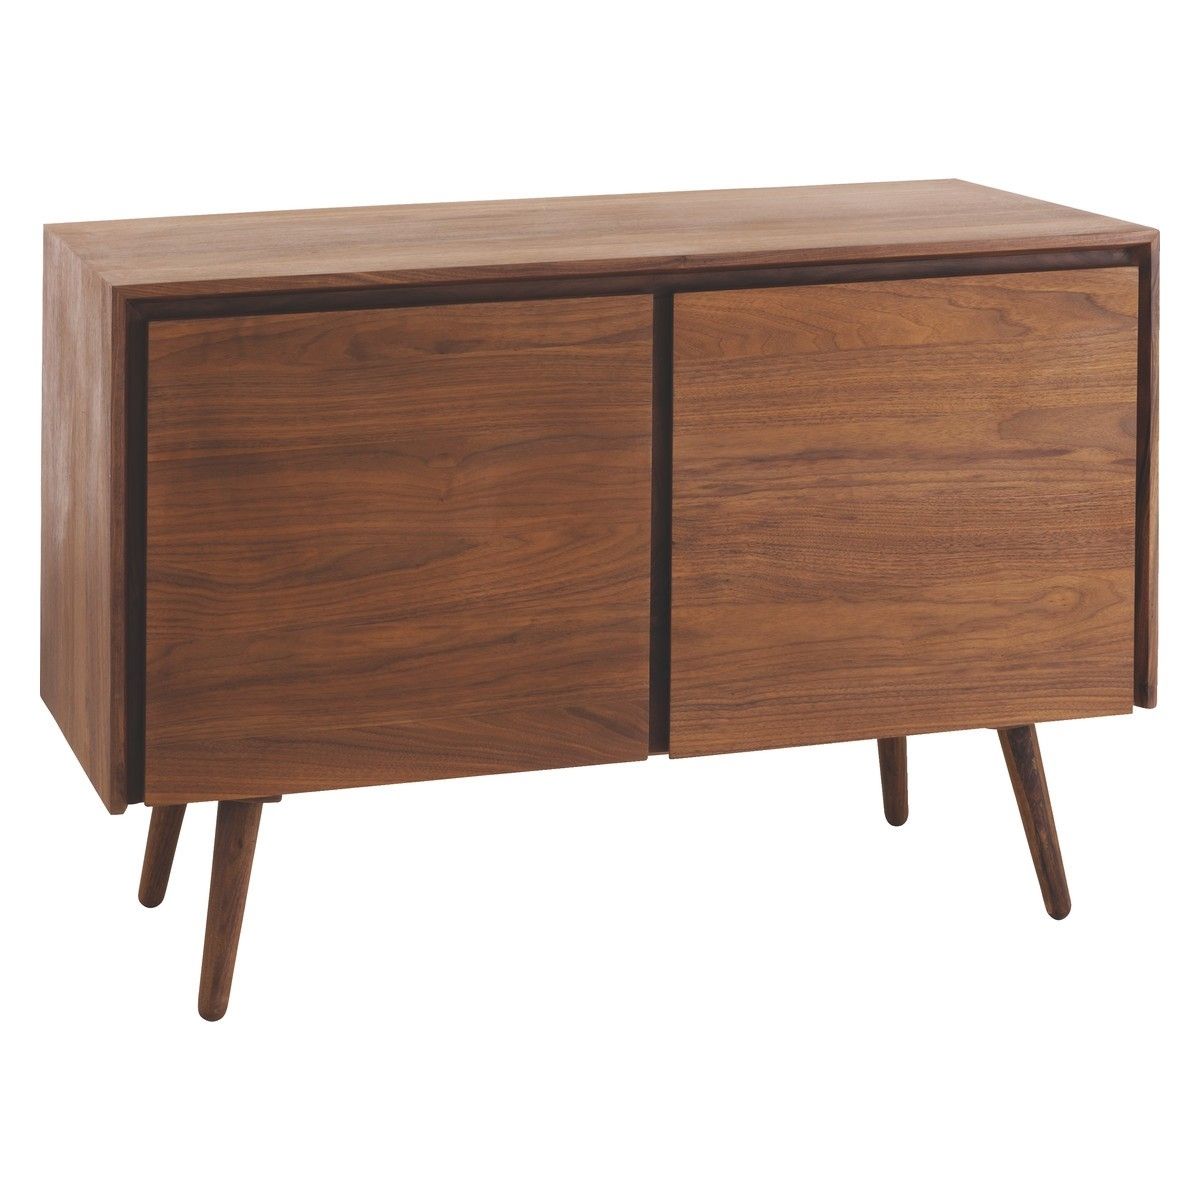 Vince Walnut 2 Door Mid Century Sideboard | Buy Now At Habitat Uk Intended For Most Recently Released Oil Pale Finish 3 Door Sideboards (View 11 of 20)